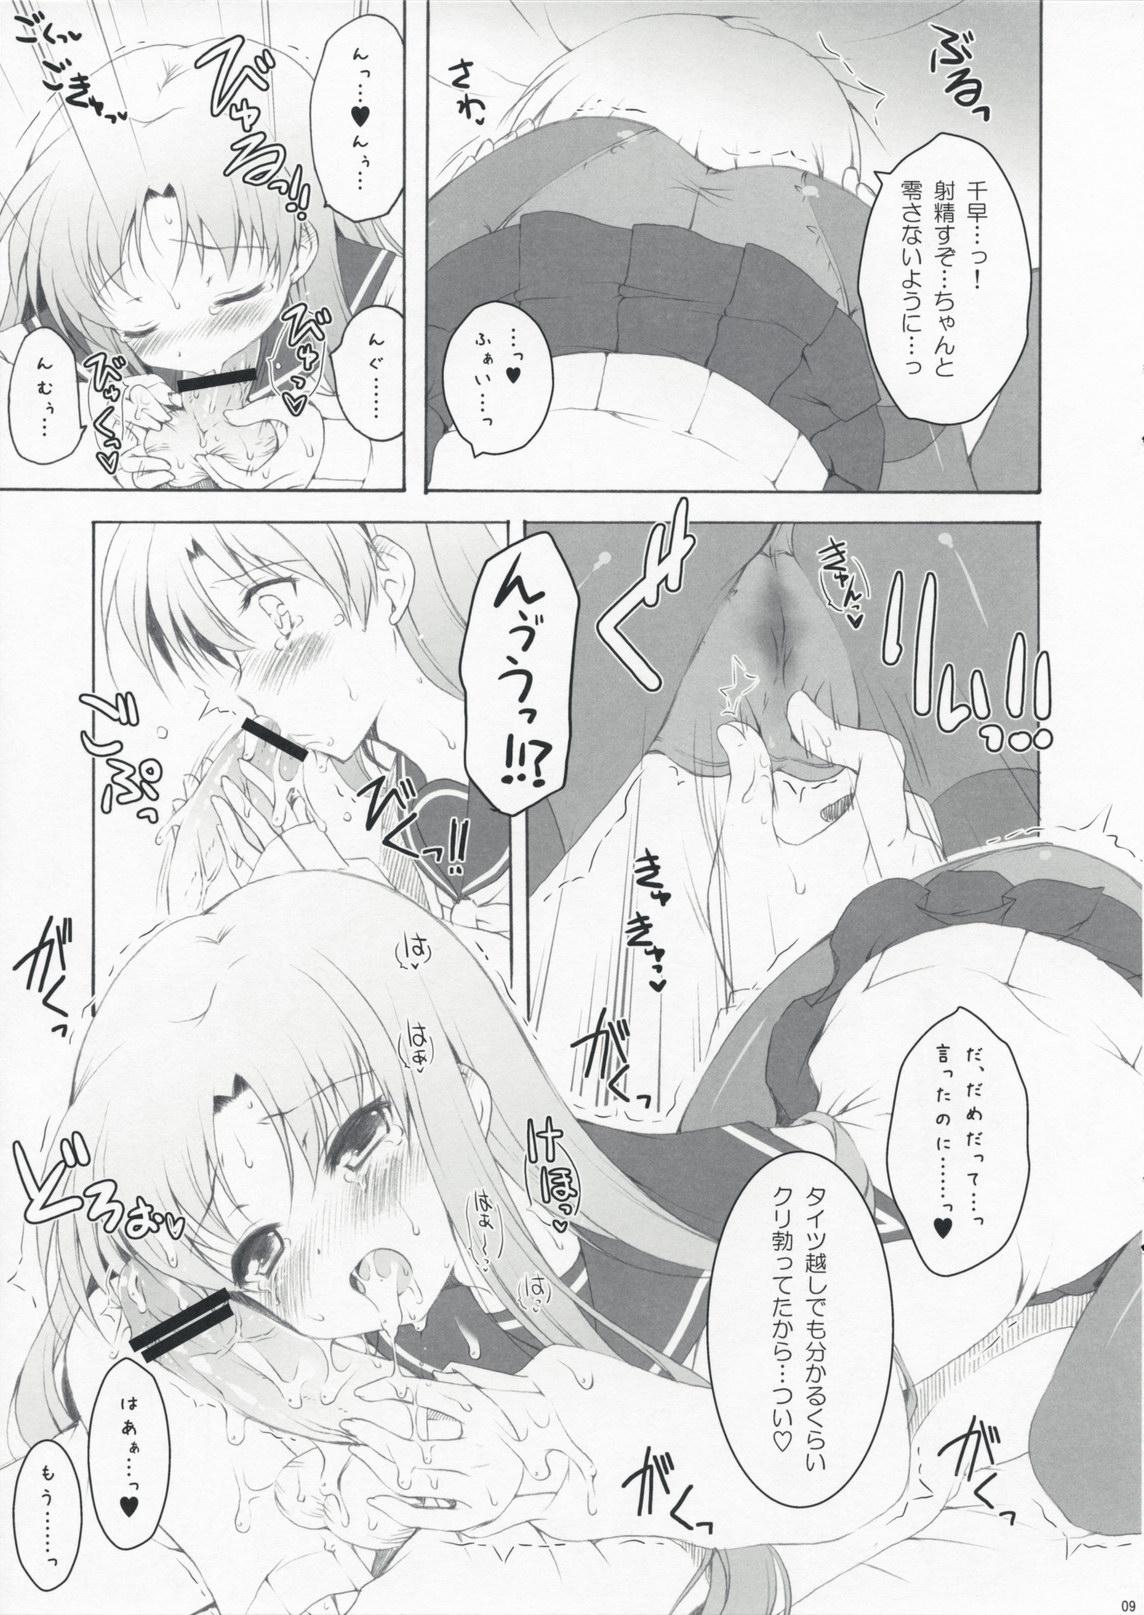 Salope miss you - The idolmaster Grandmother - Page 8